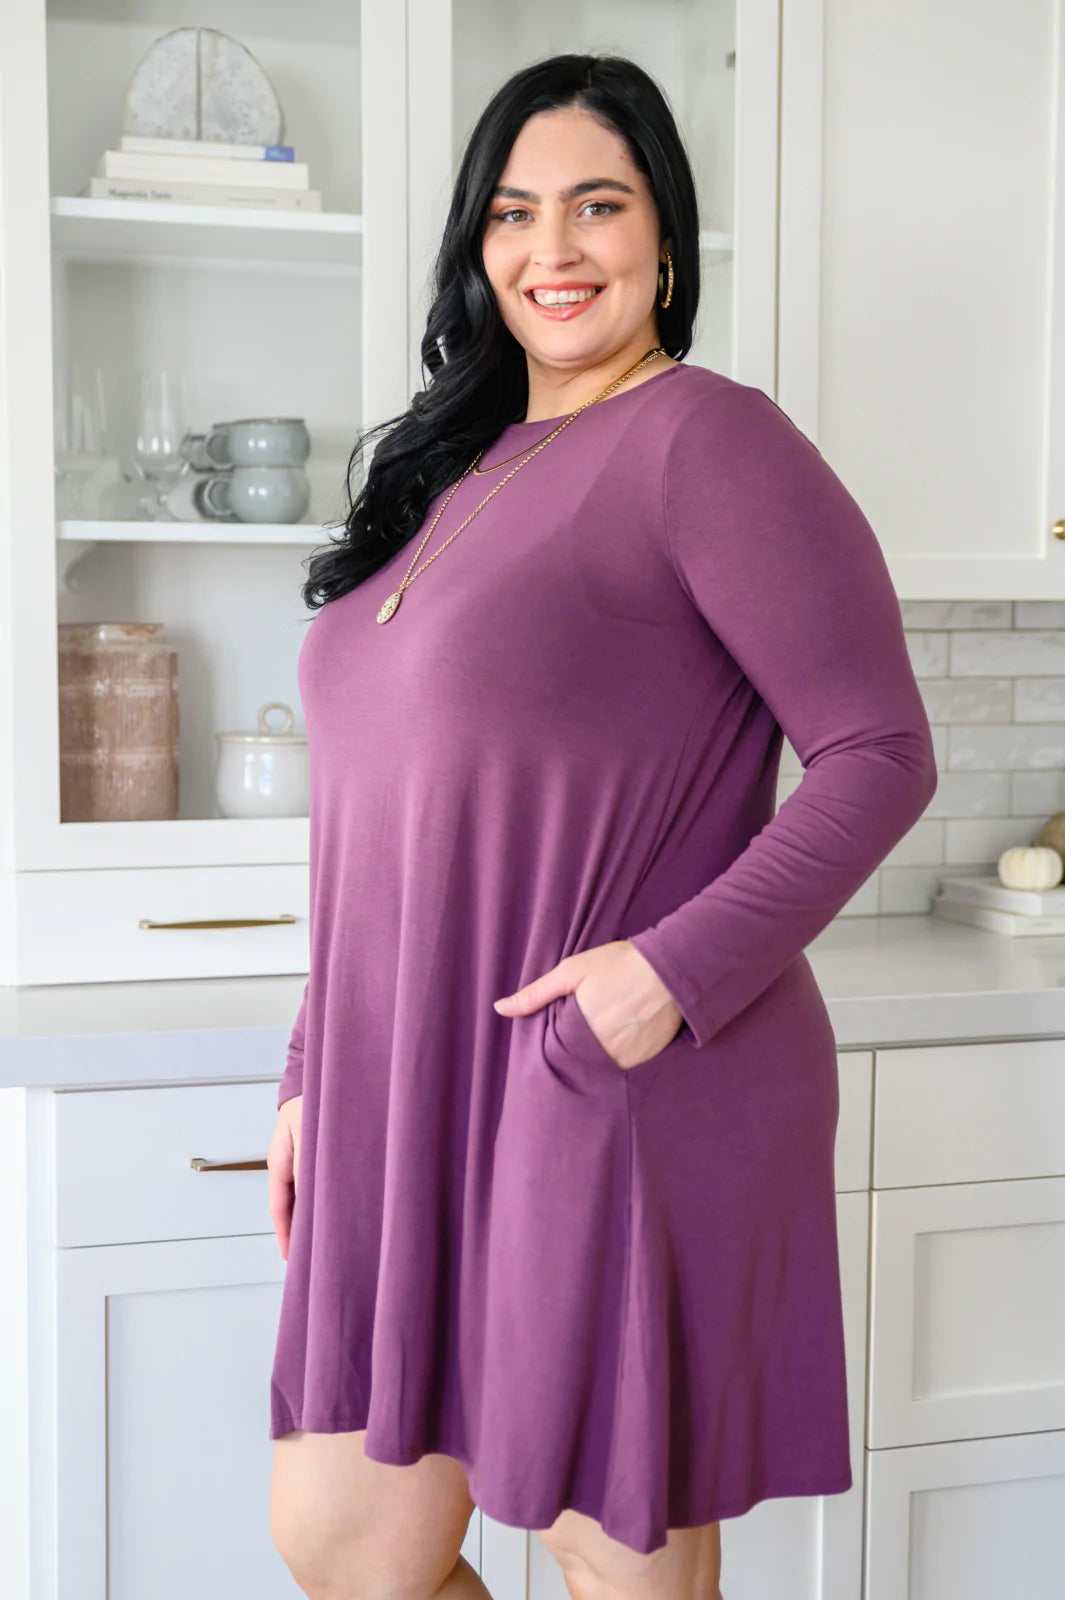 Brand Collab Brand Collab Most Reliable Long Sleeve Knit Dress In Plum